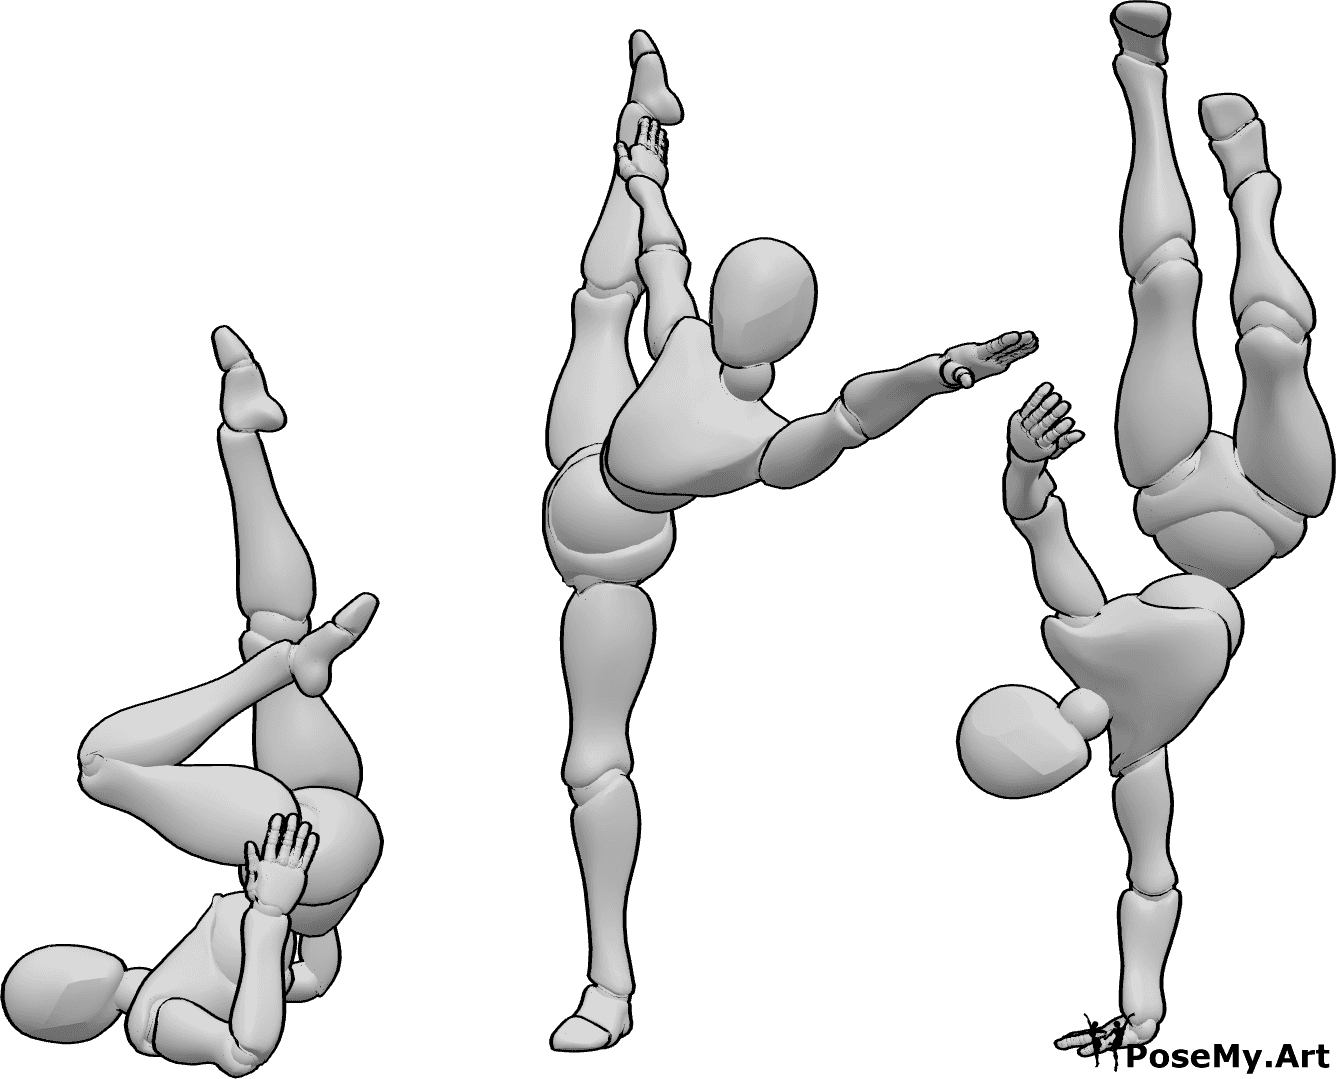 Pose Reference - Acrobatic dance pose - Three females are acrobatic dancing and posing